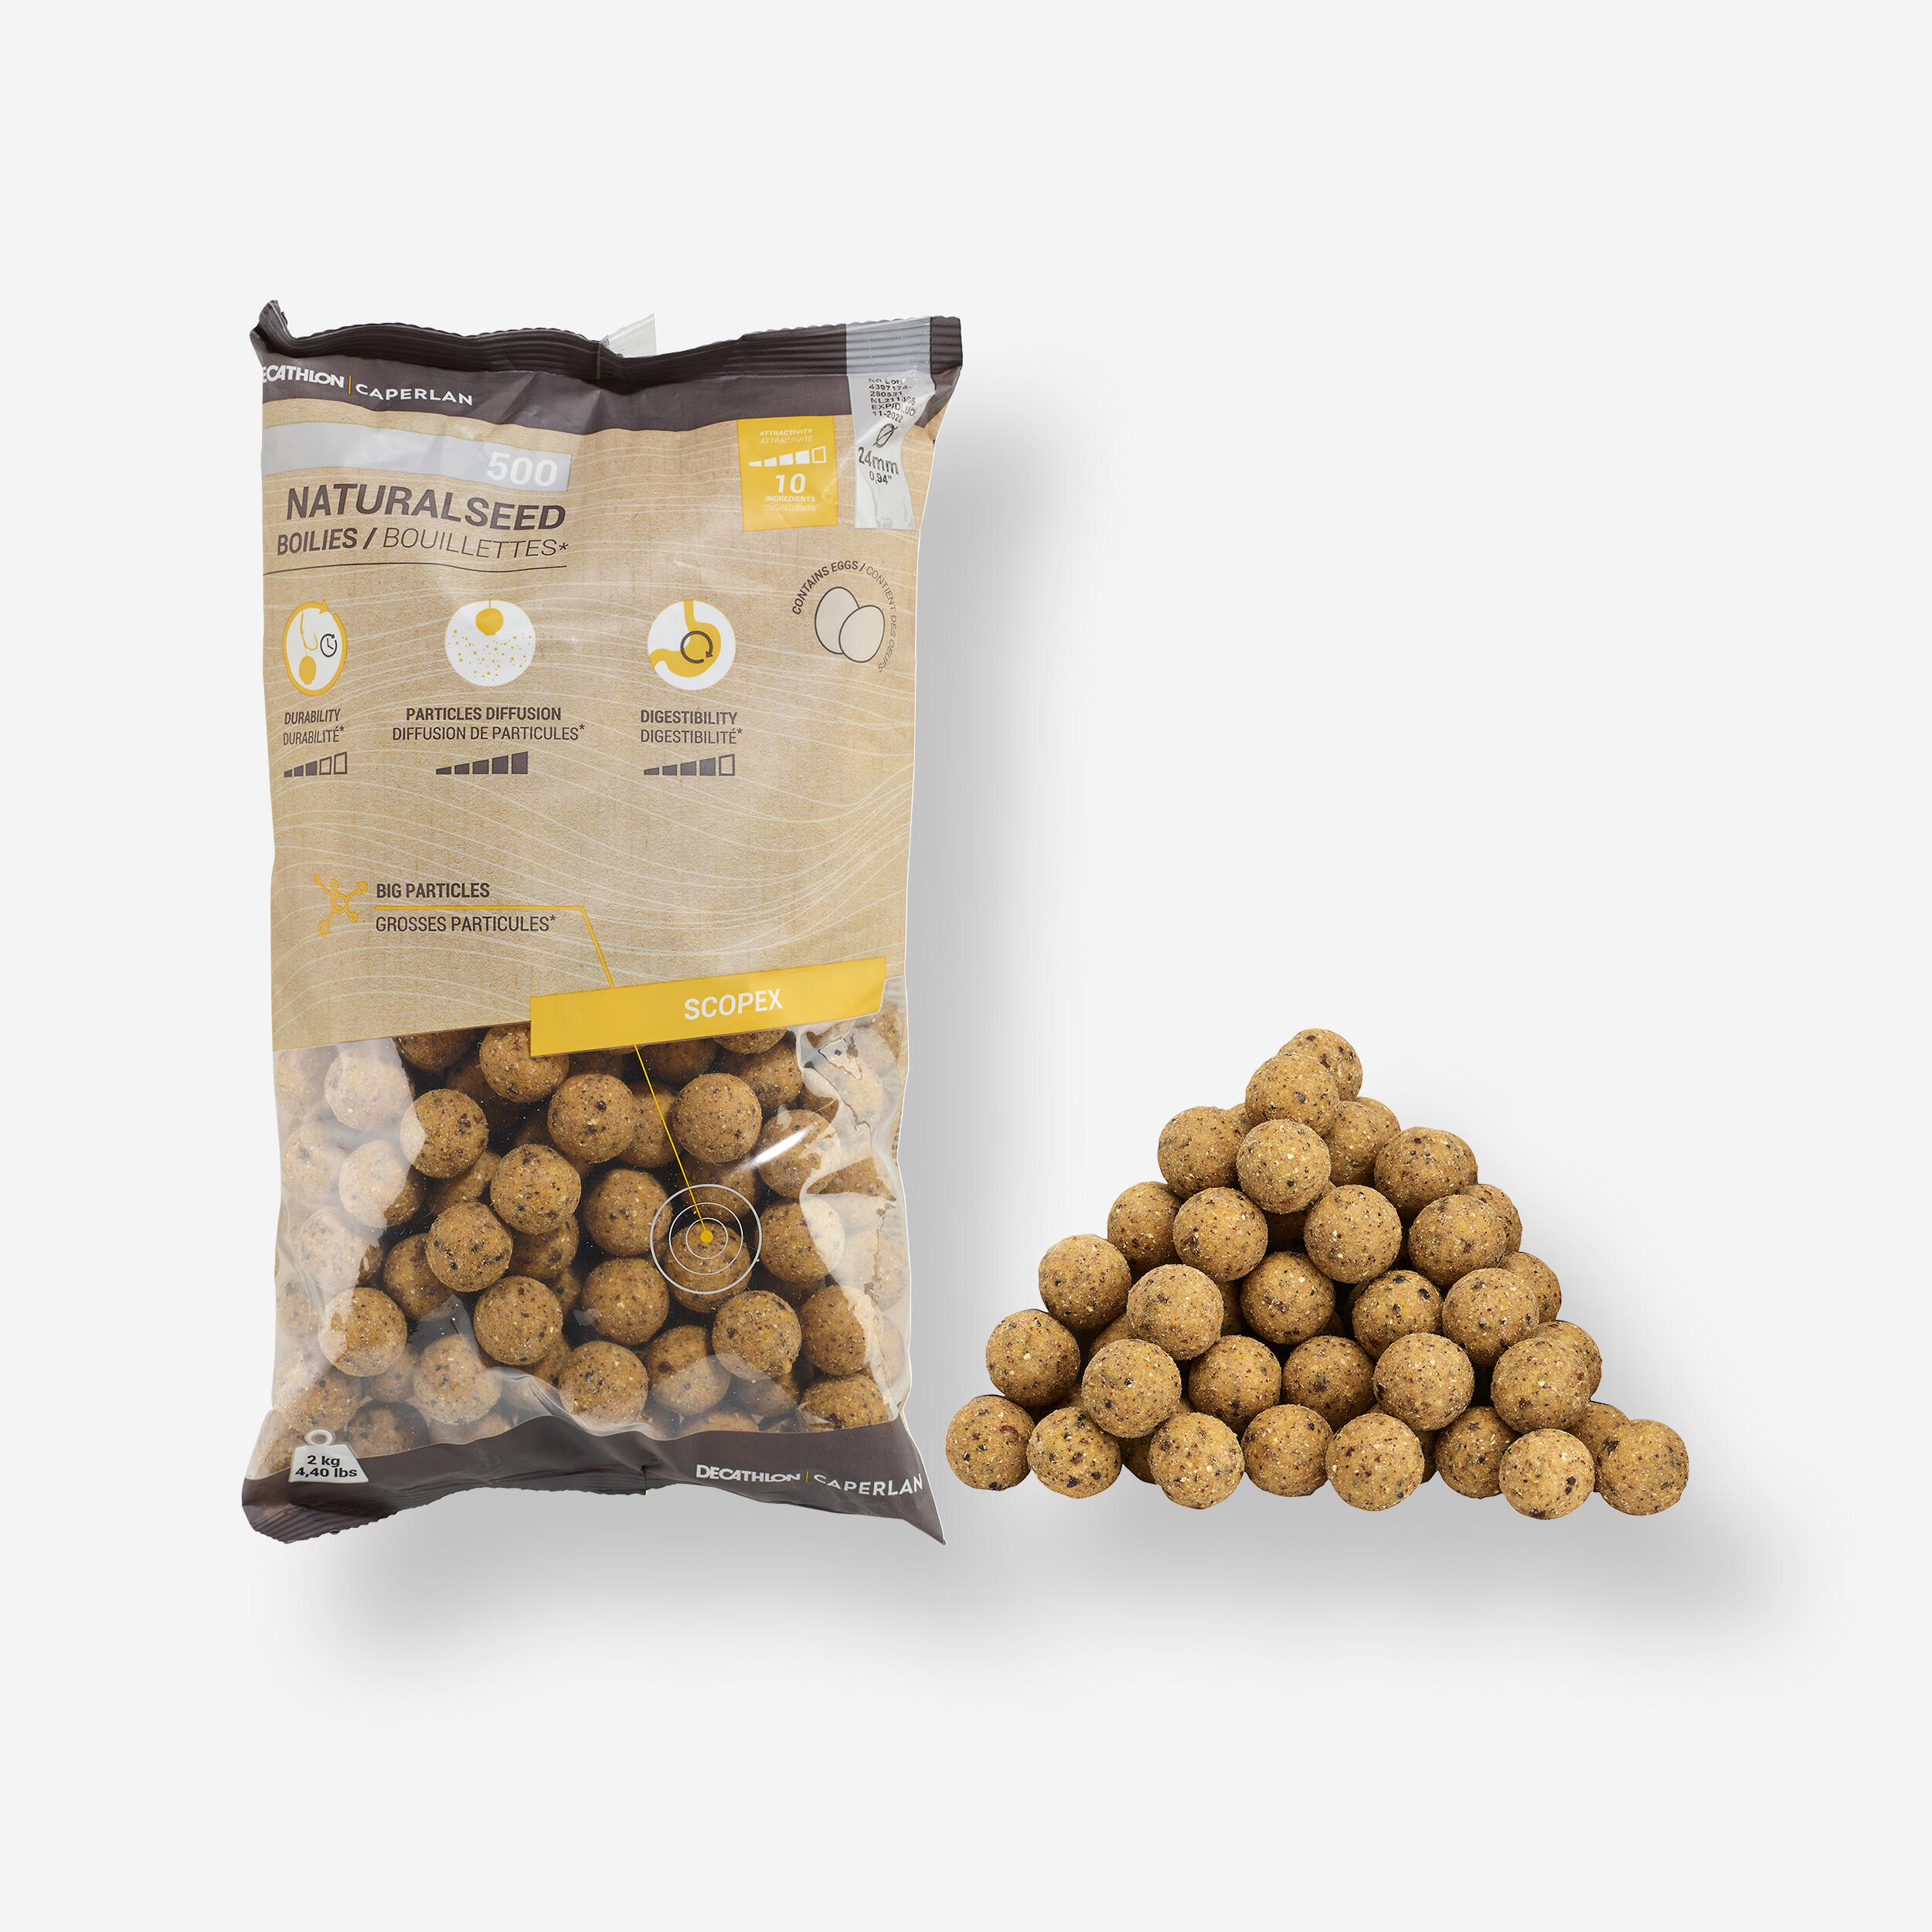 Caperlan Carp Fishing Boilies Naturalseed 24mm 2kg - Scopex - One Size